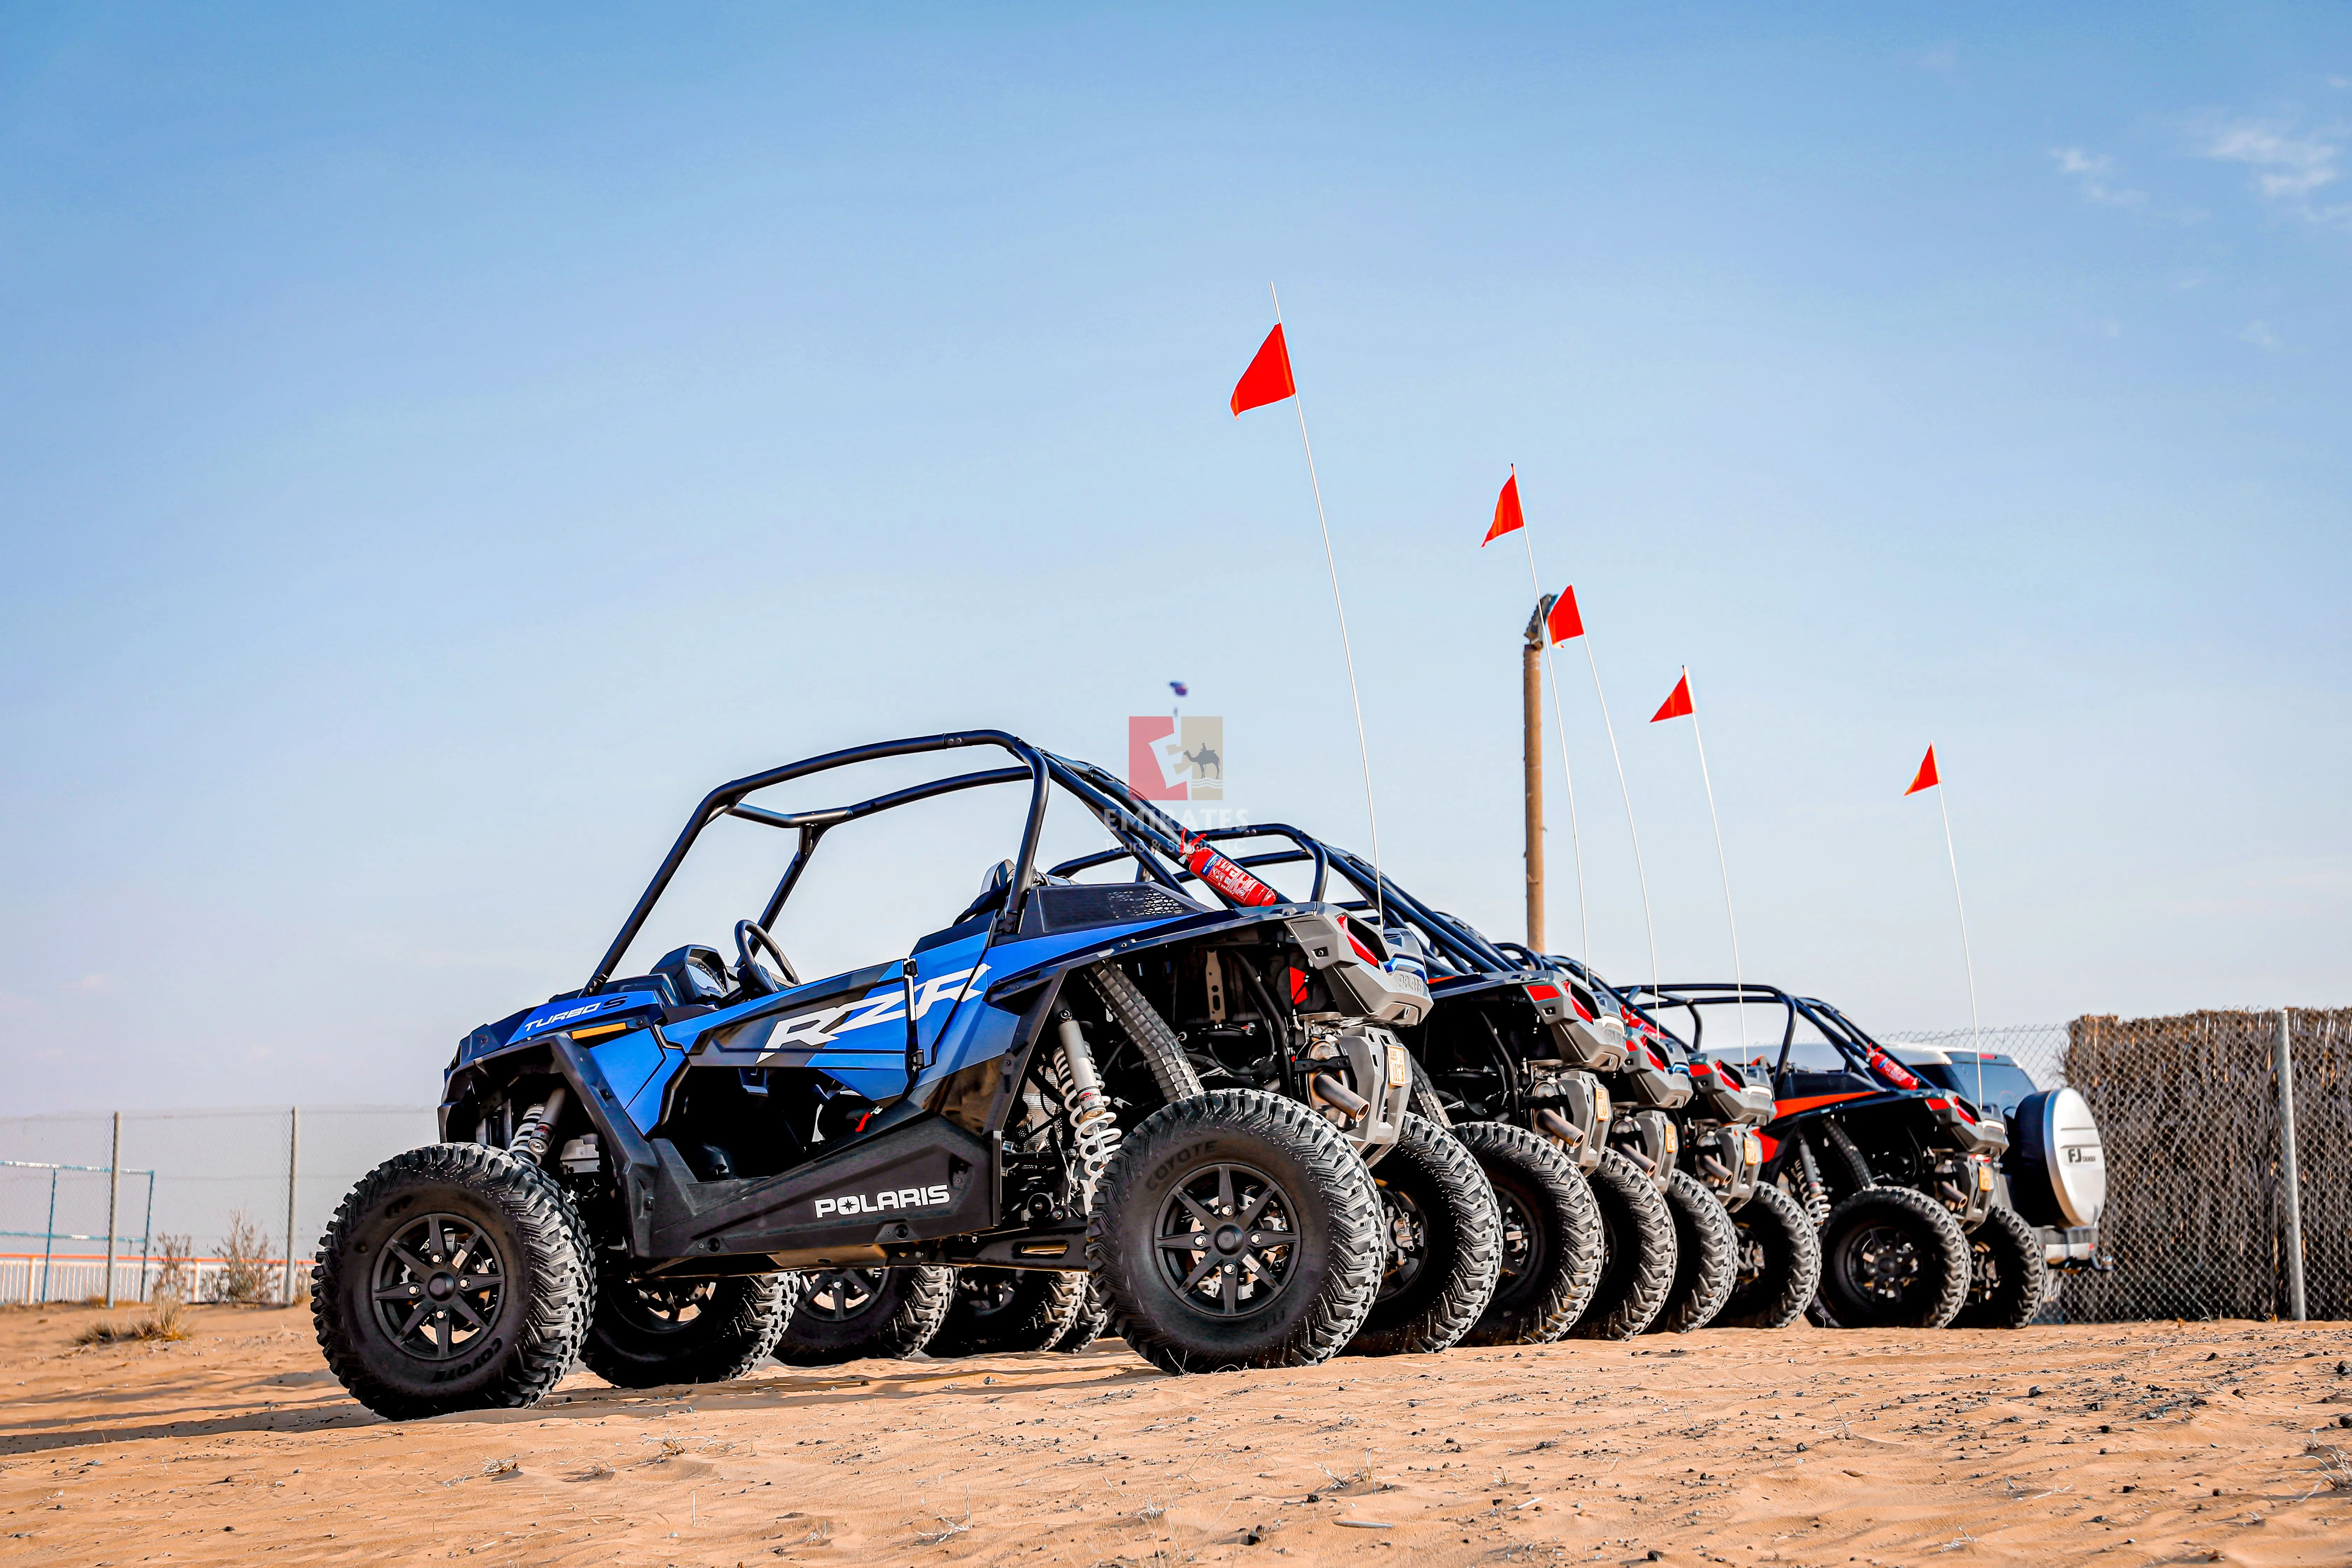 Dune Buggy Morning Tour: Two Seater-90 Minutes